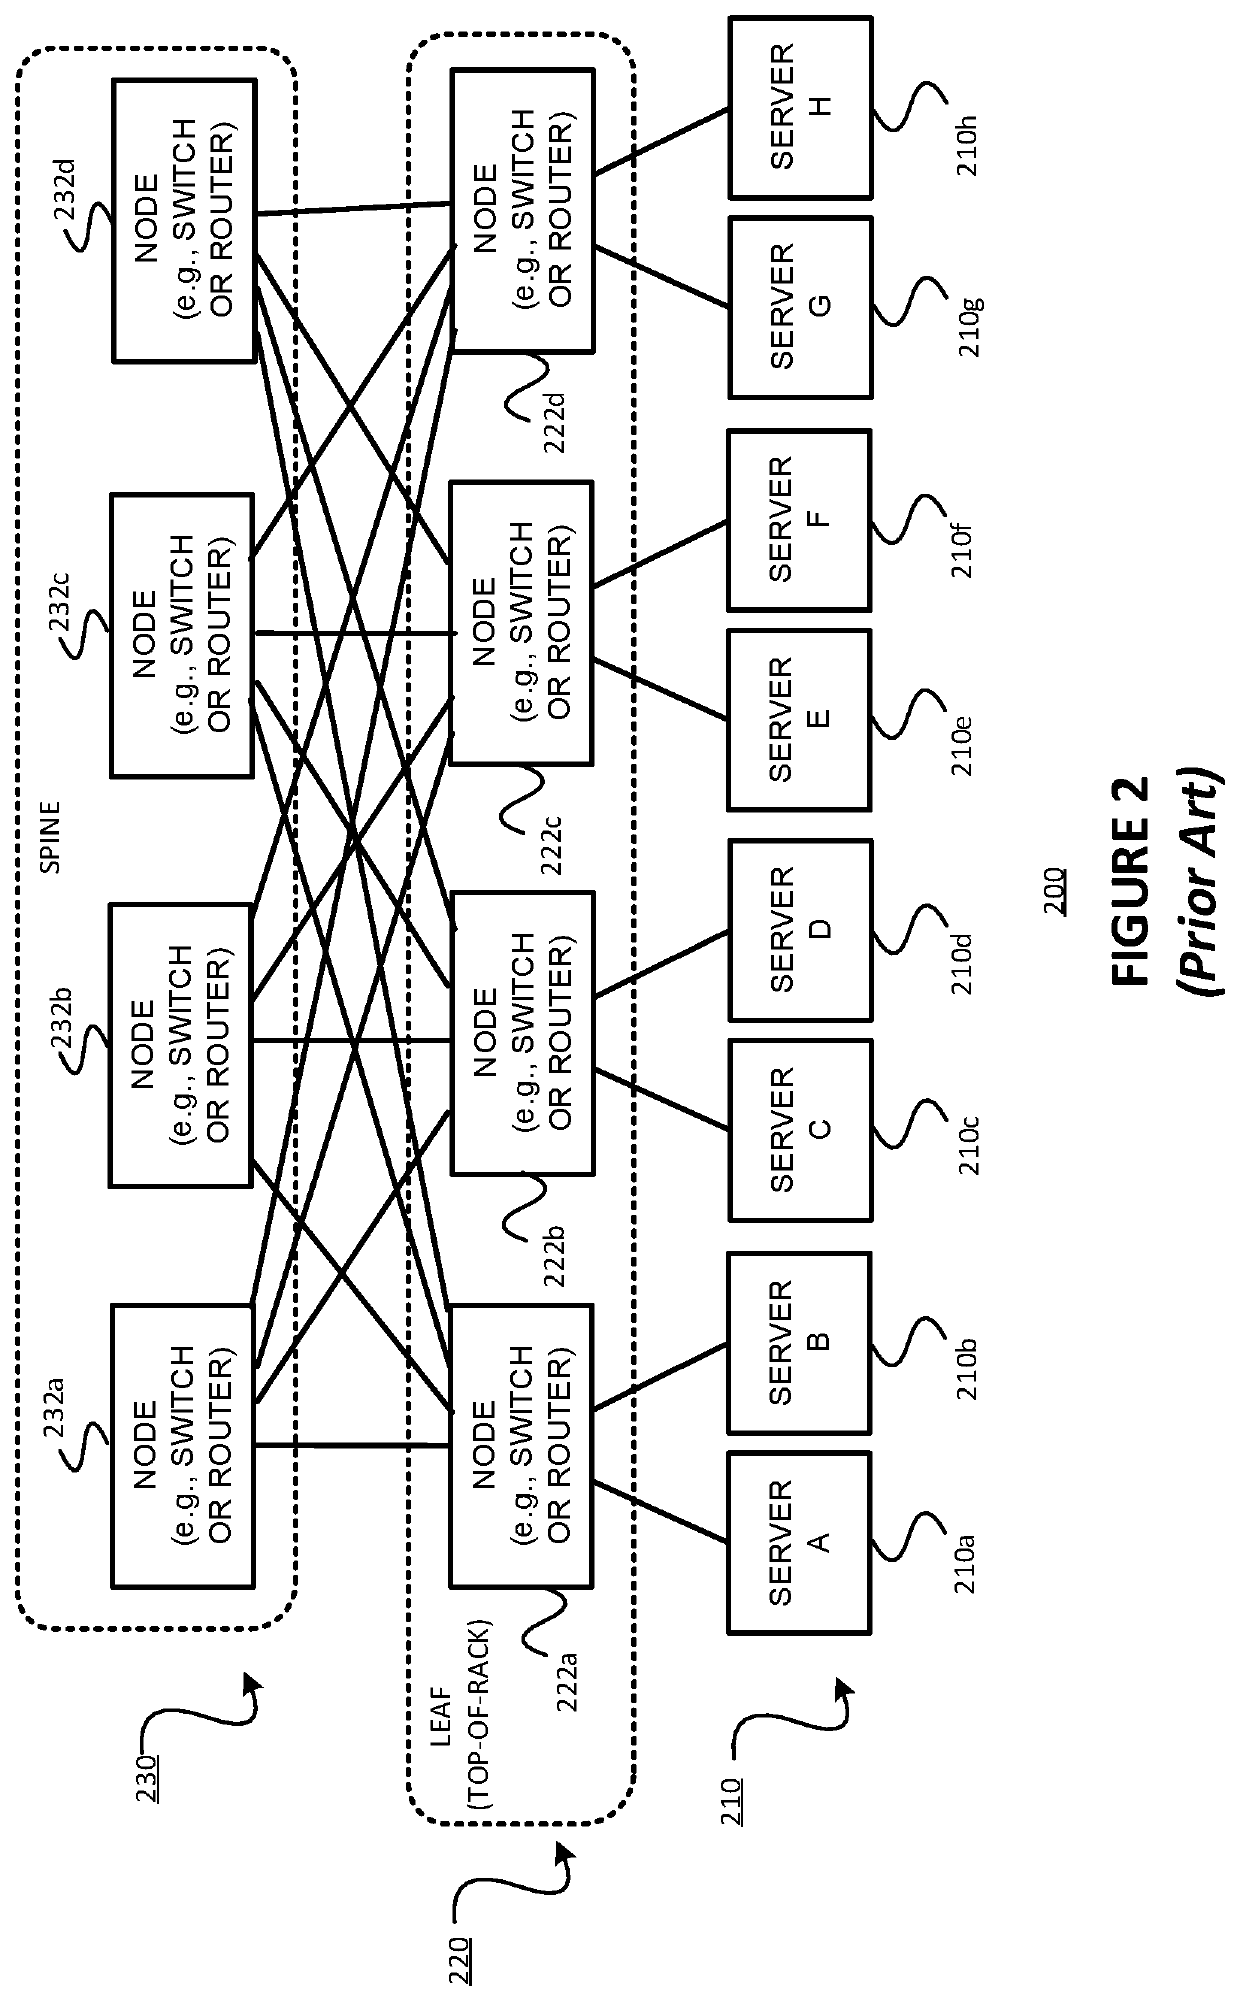 Reducing or eliminating routing microloops in networks having a clos topology, such as data center clos networks employing the exterior border gateway protocol (EBGP) for example